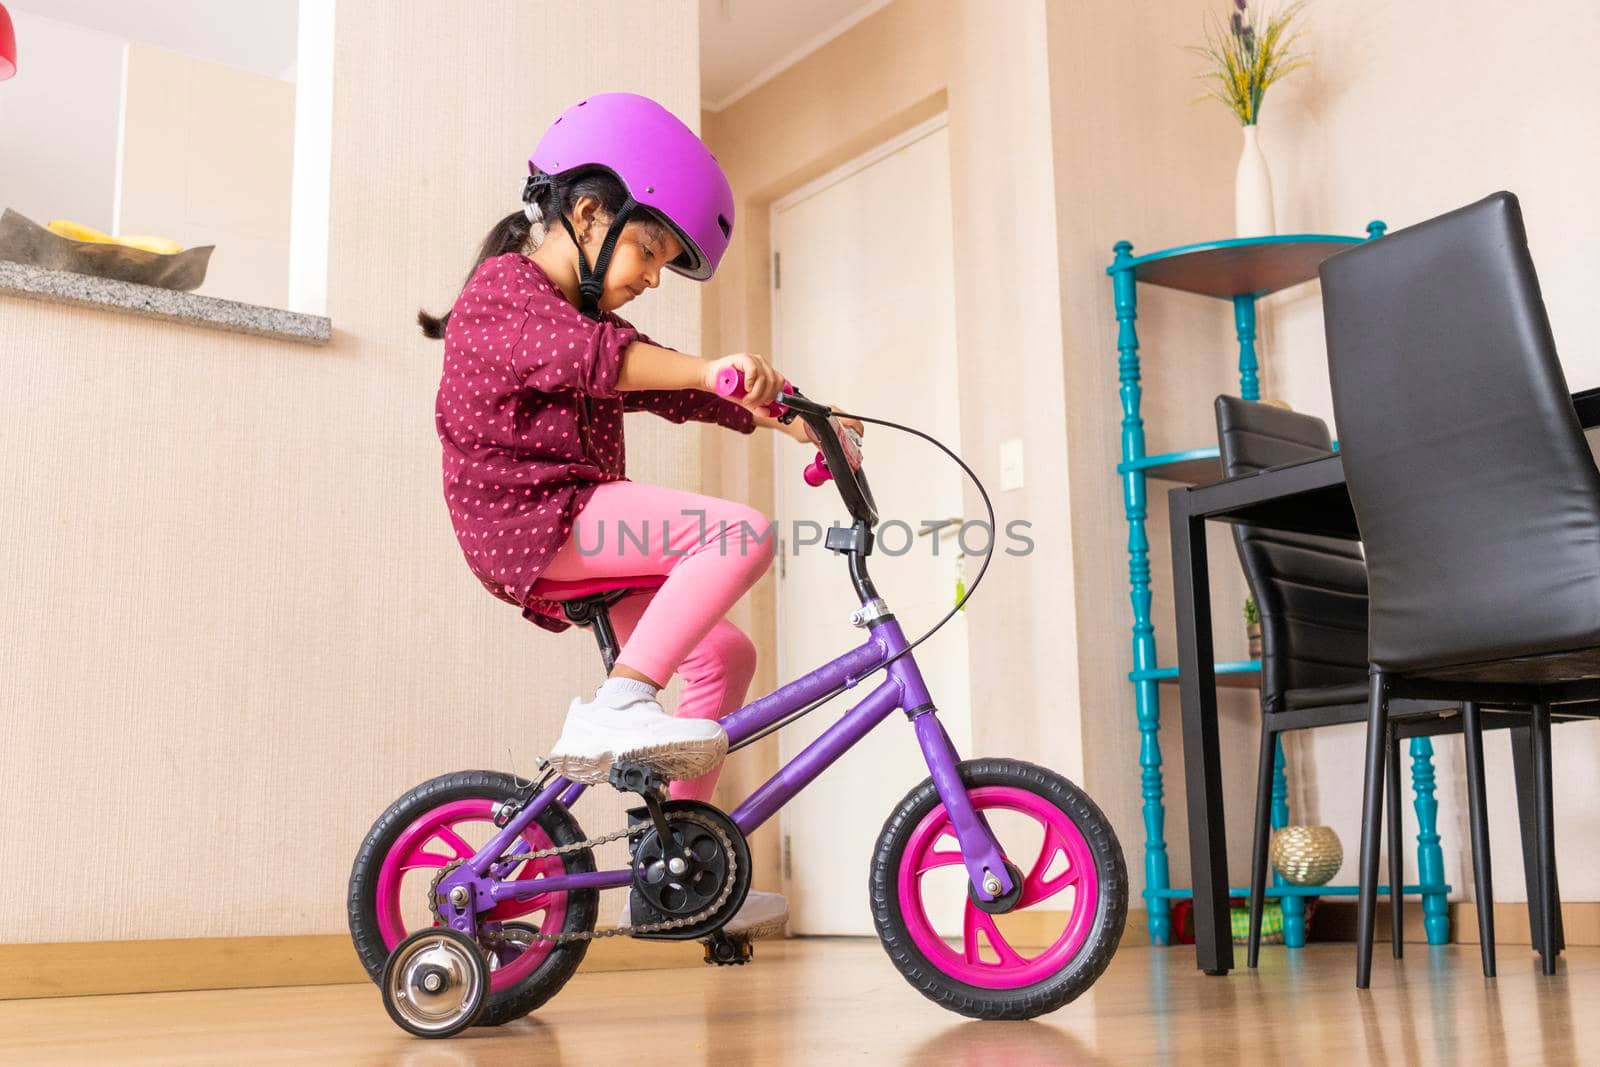 Little girl is riding a bicycle in her living room by eagg13